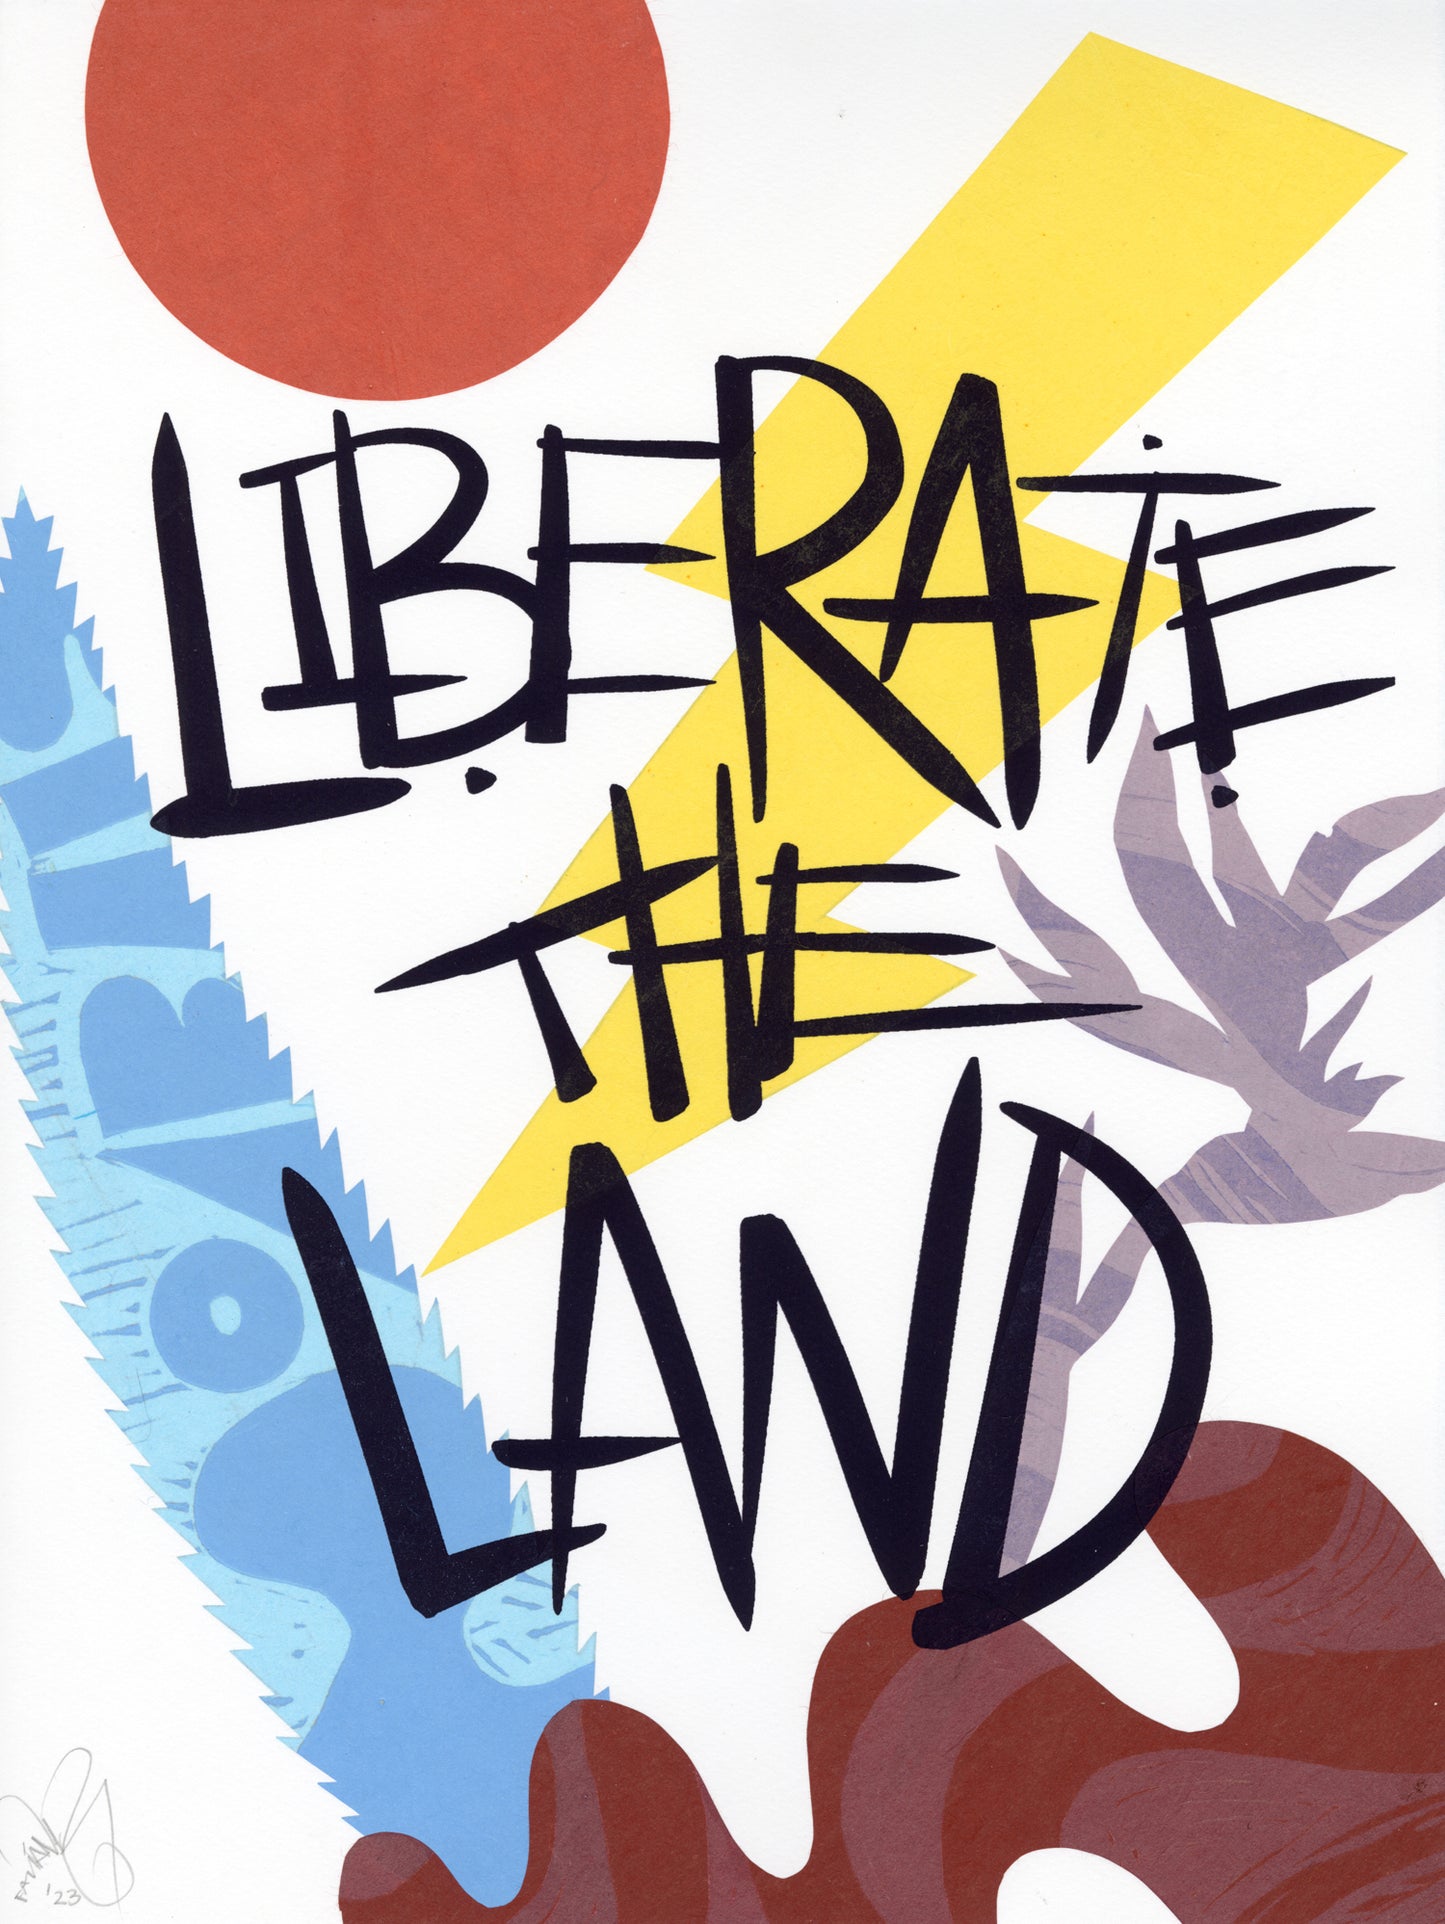 Liberate The Land 20